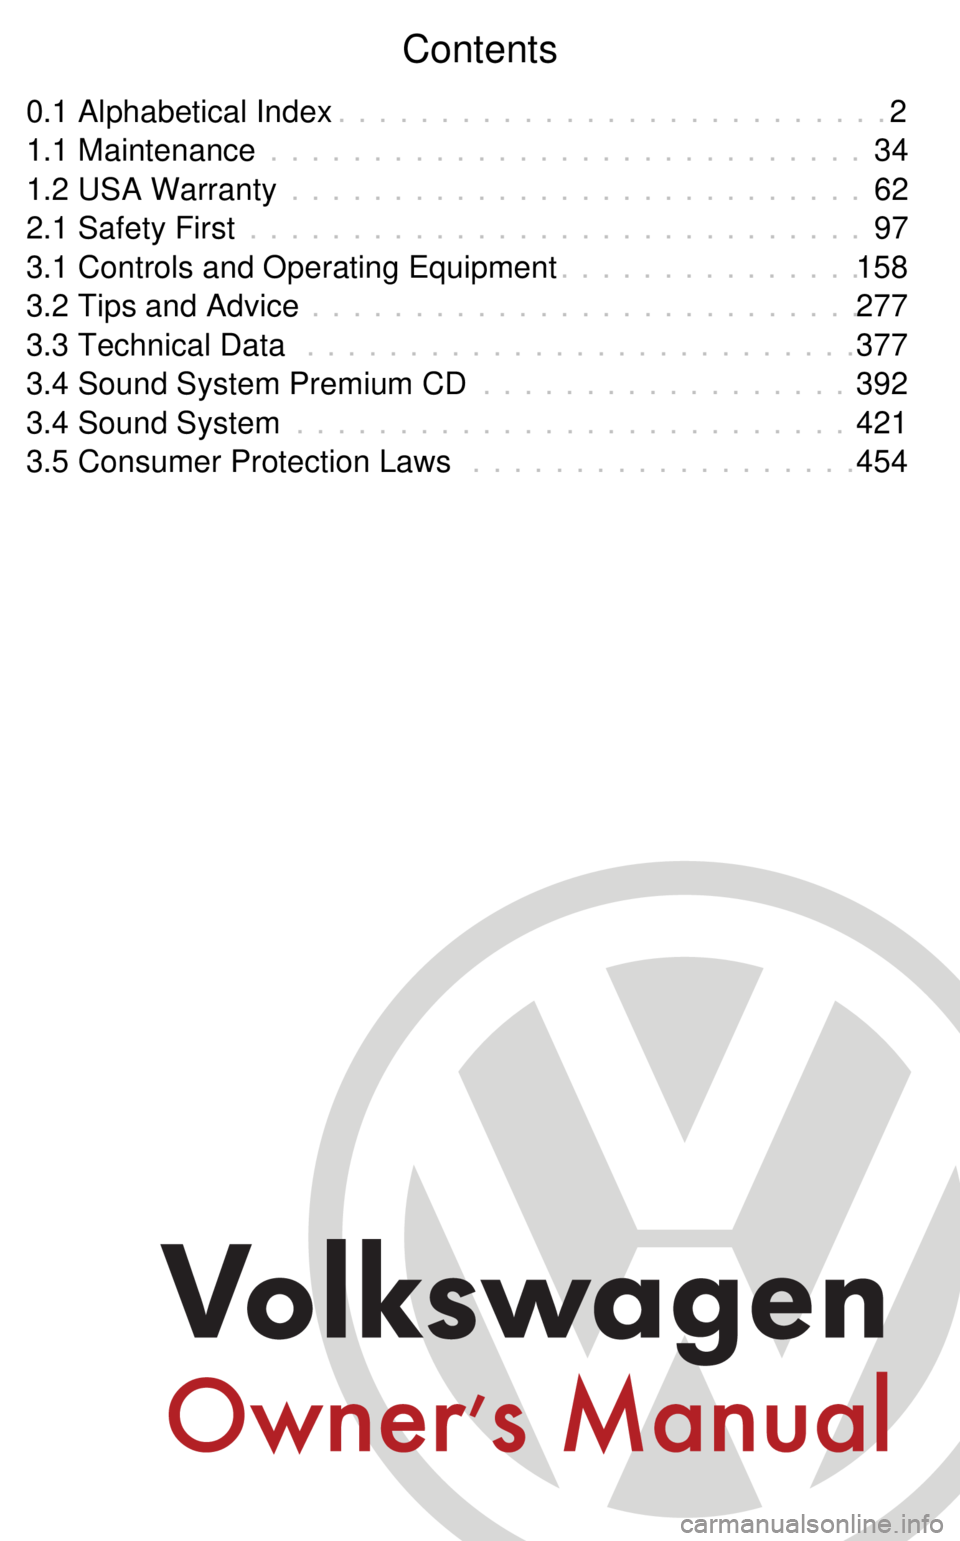 VOLKSWAGEN GOLF 2000  Owners Manual Contents
0.1 Alphabetical Index 2
. . . . . . . . . . . . . . . . . . . . . . . . . . .
1.1 Maintenance 34
. . . . . . . . . . . . . . . . . . . . . . . . . . . . .
1.2 USA Warranty 62
. . . . . . . .